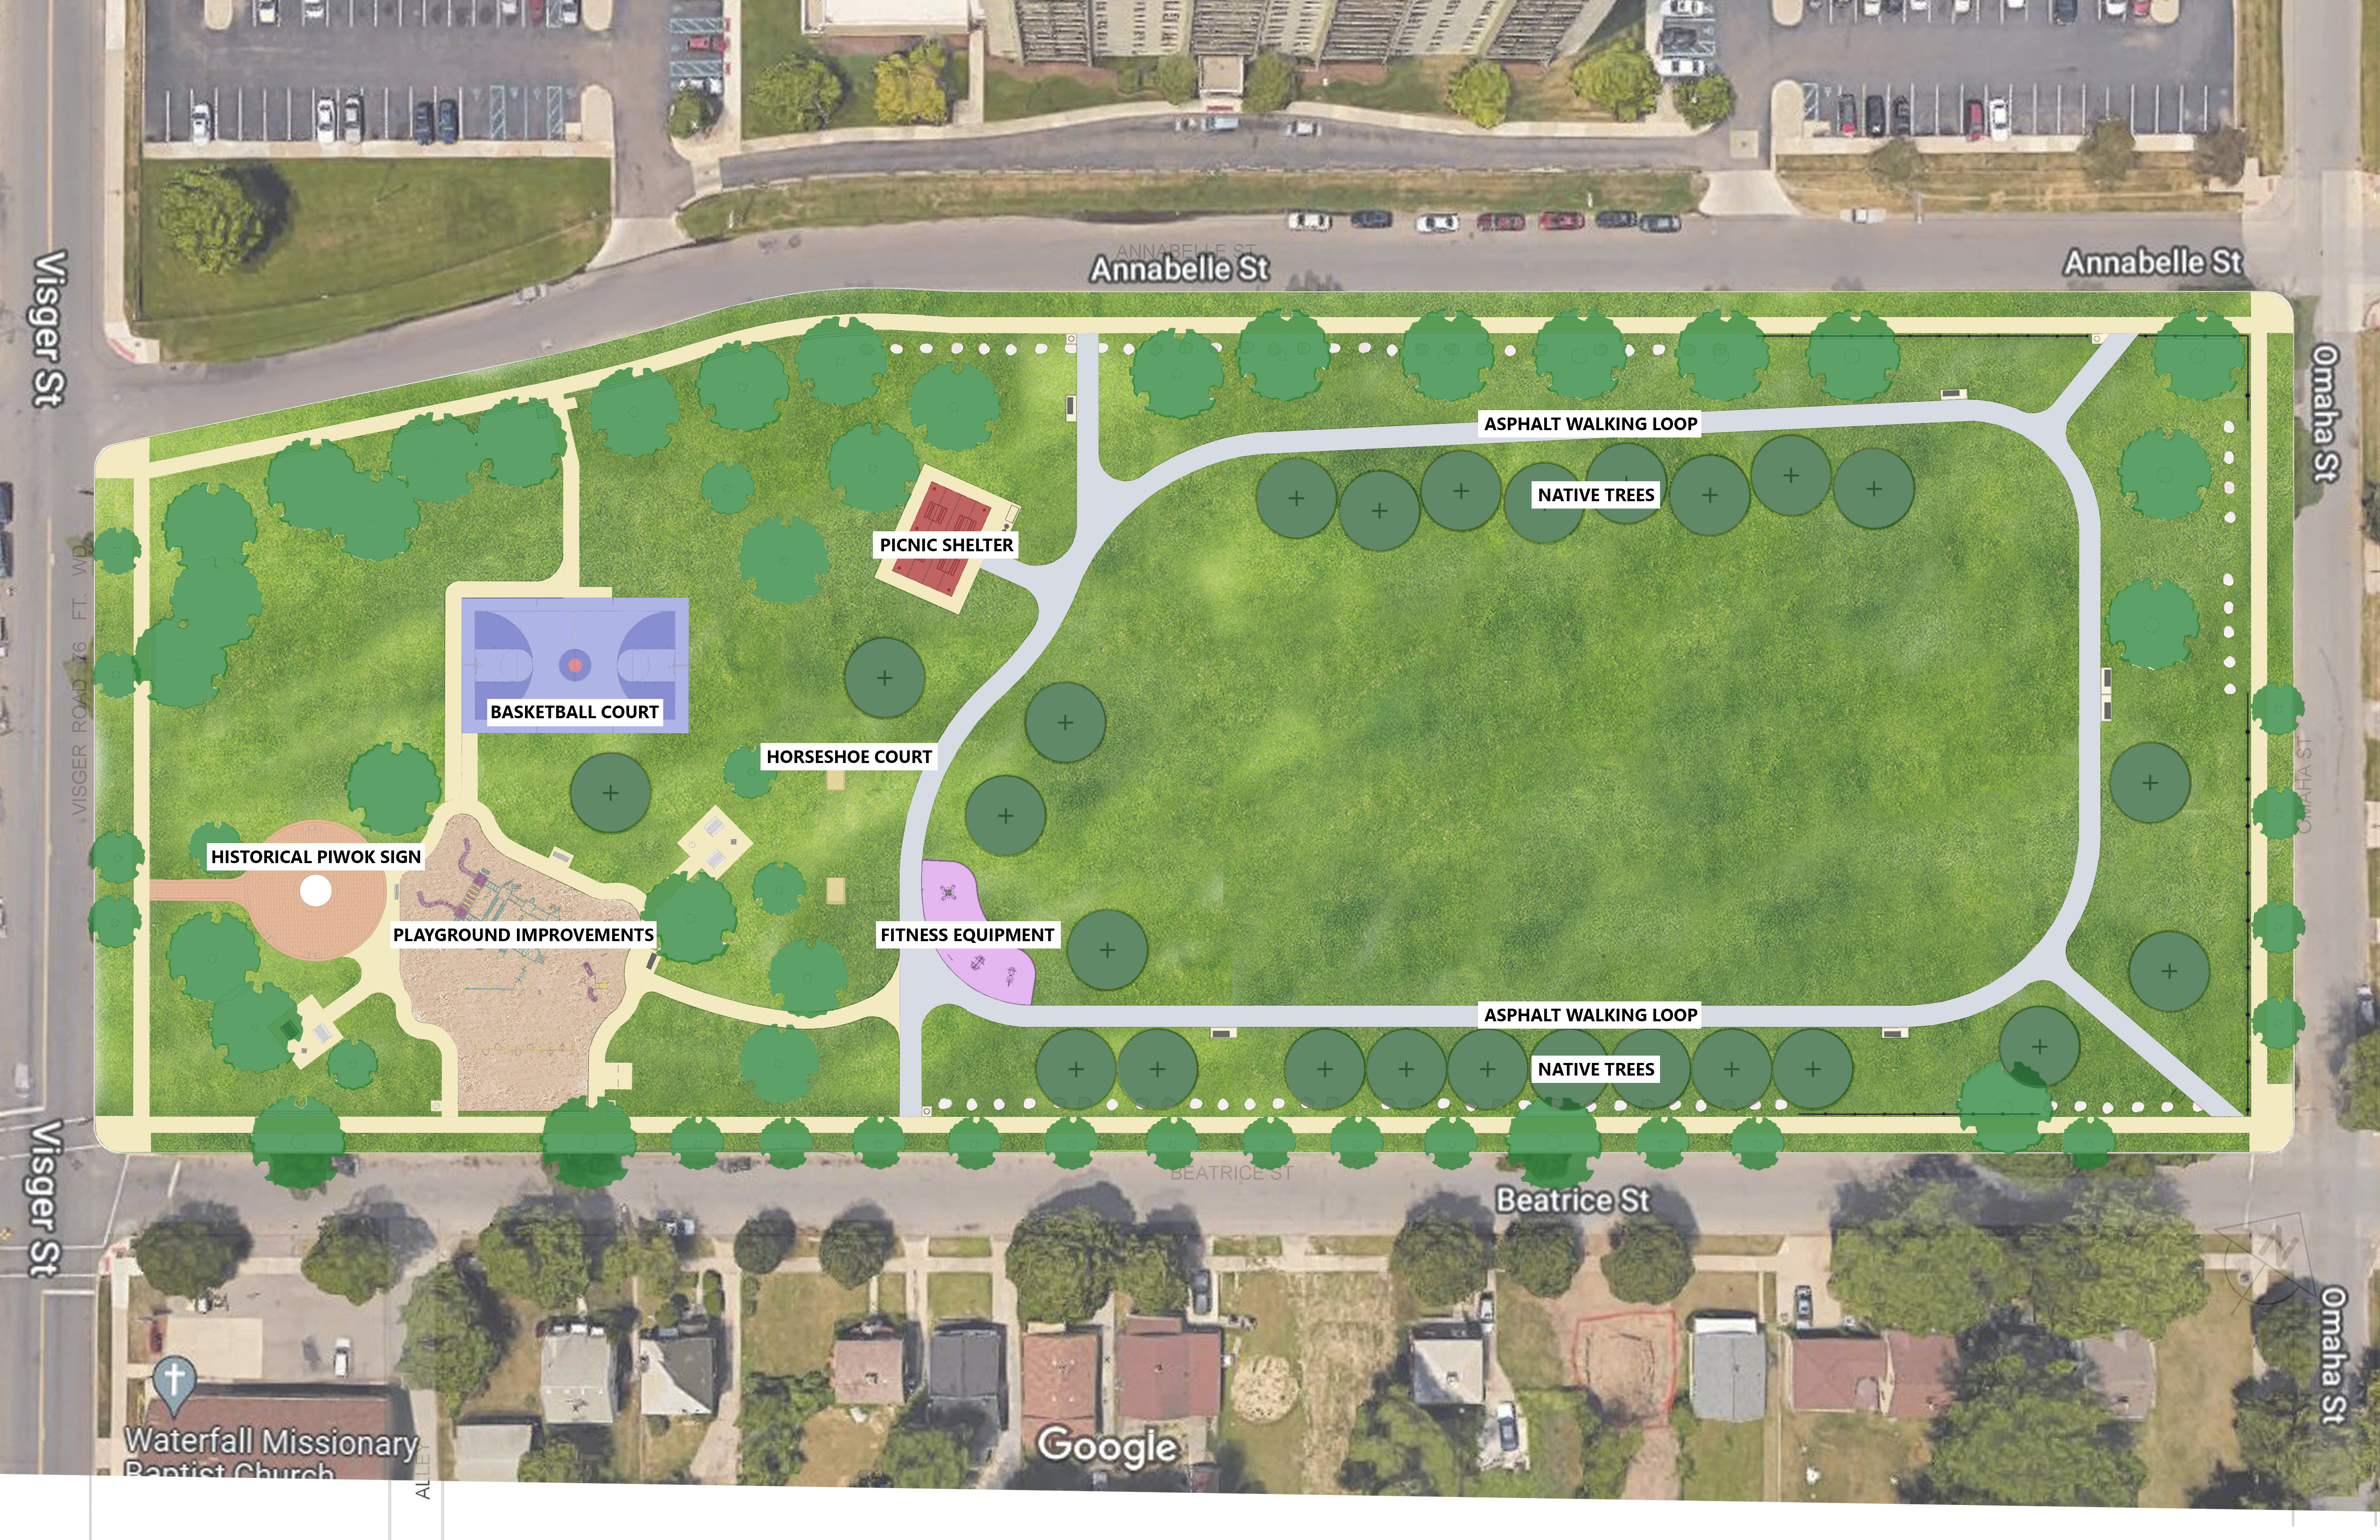 Piwok site plan, including playground, walking paths, picnic area and basketball court